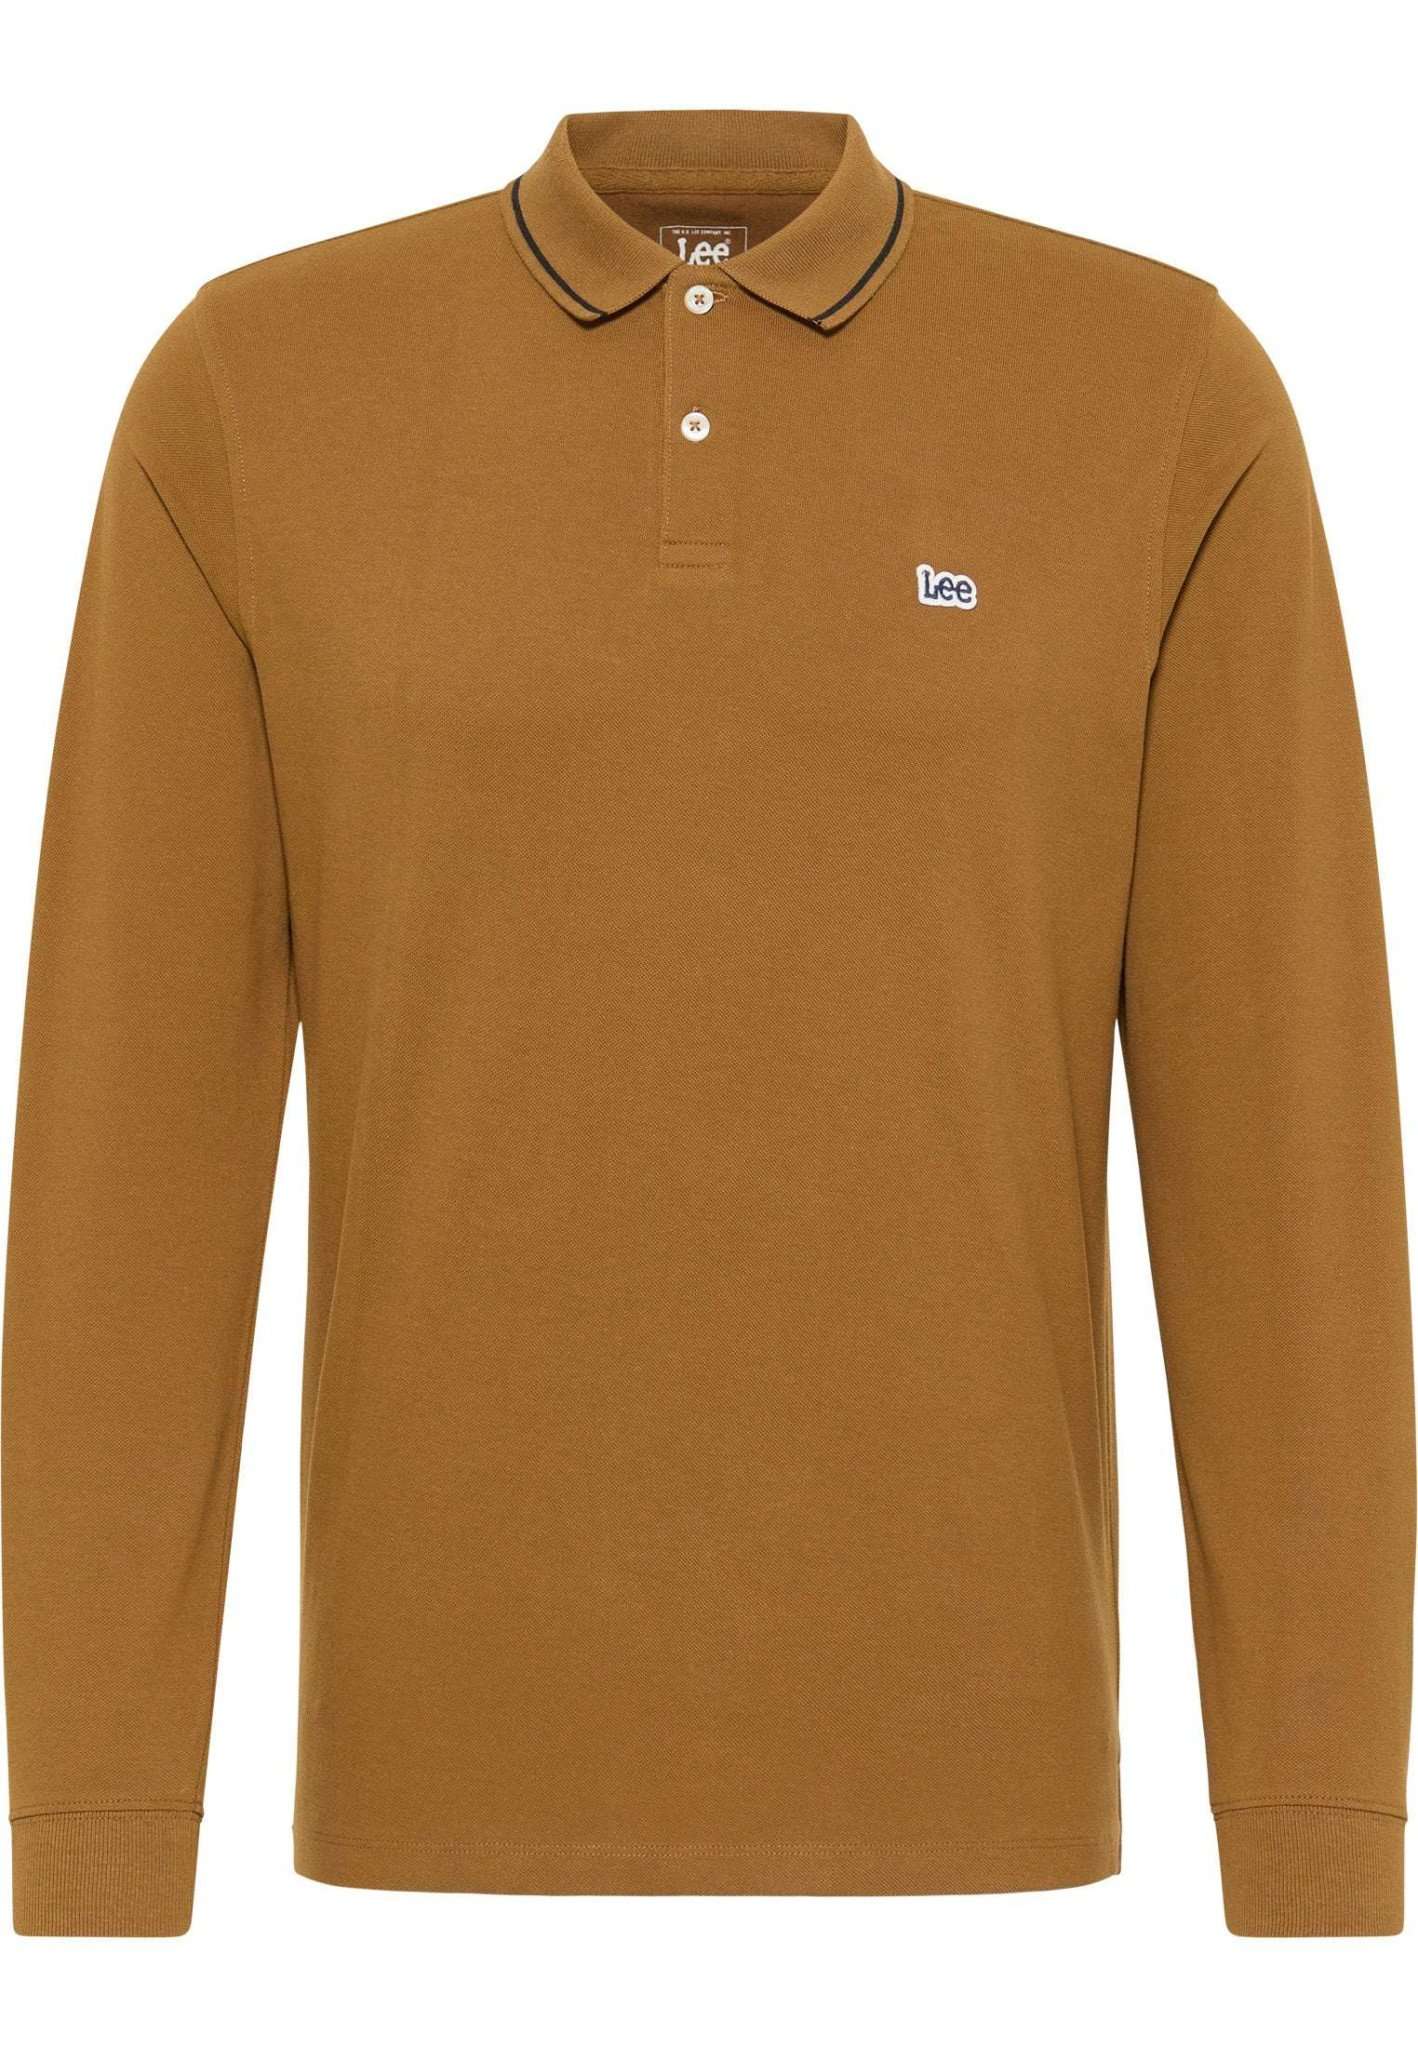 Ls Pique Polo in Tumbleweed Pullover Lee   